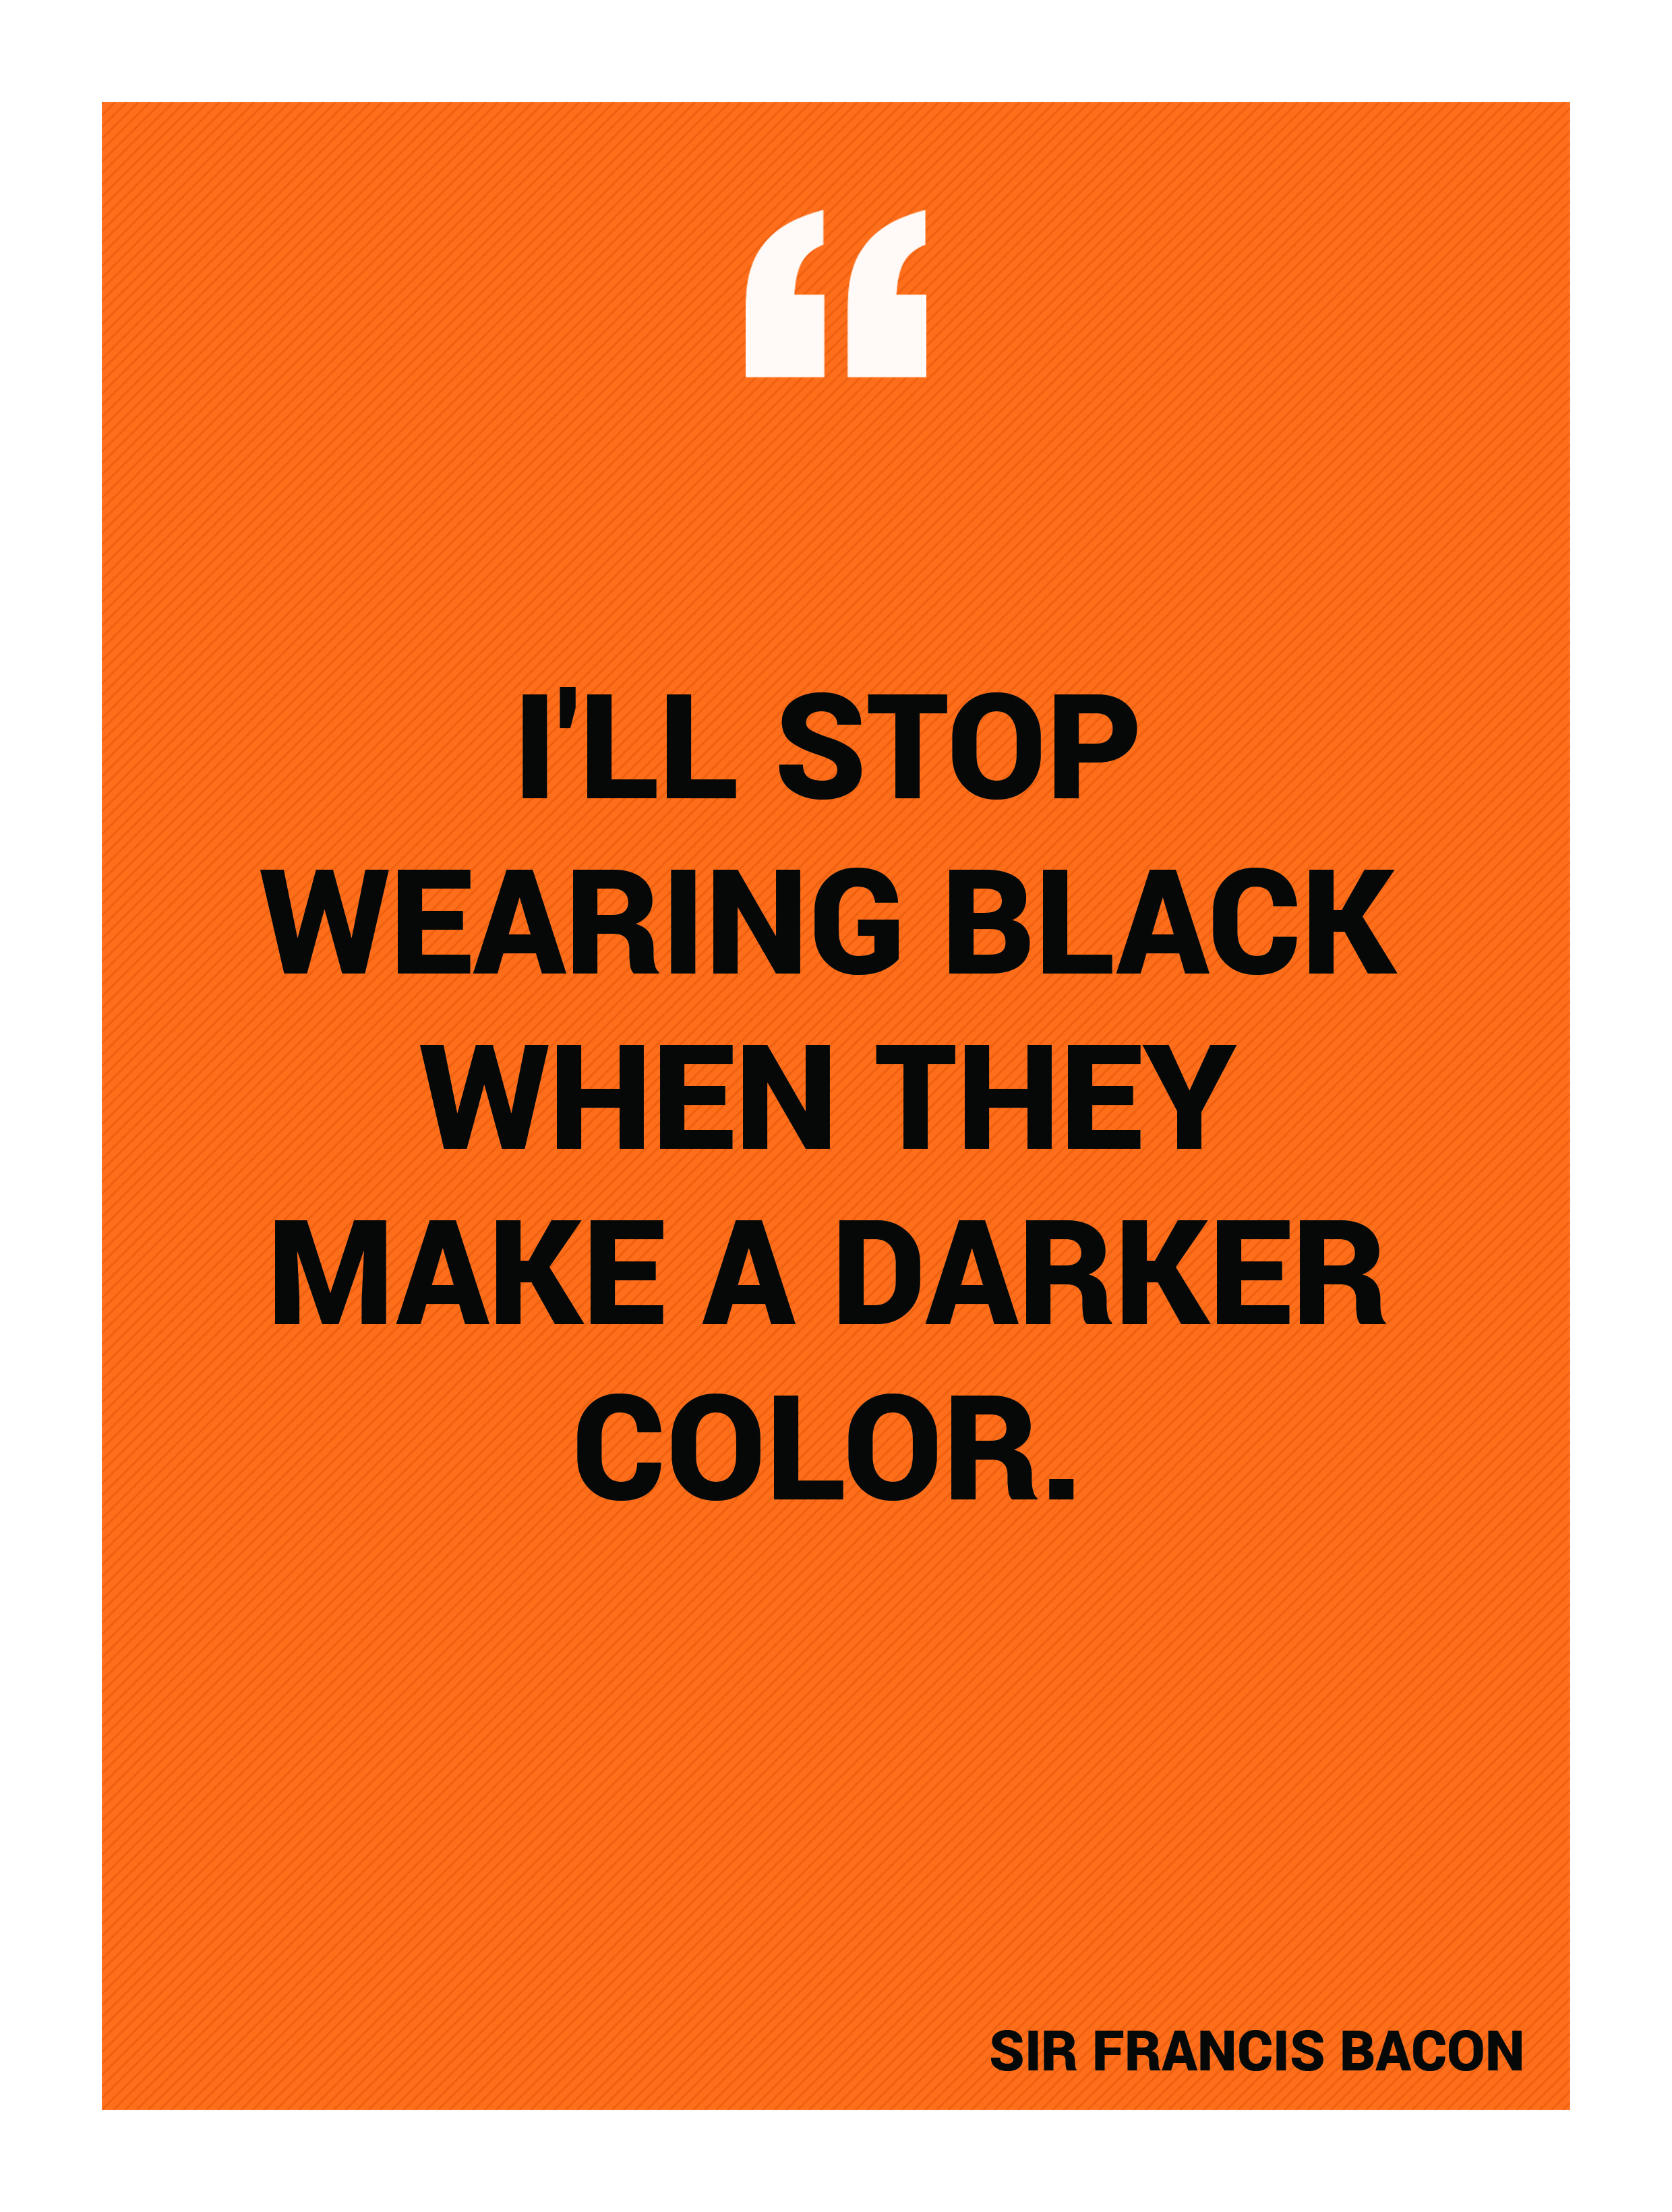 "I'll stop wearing black when they make a darker color."